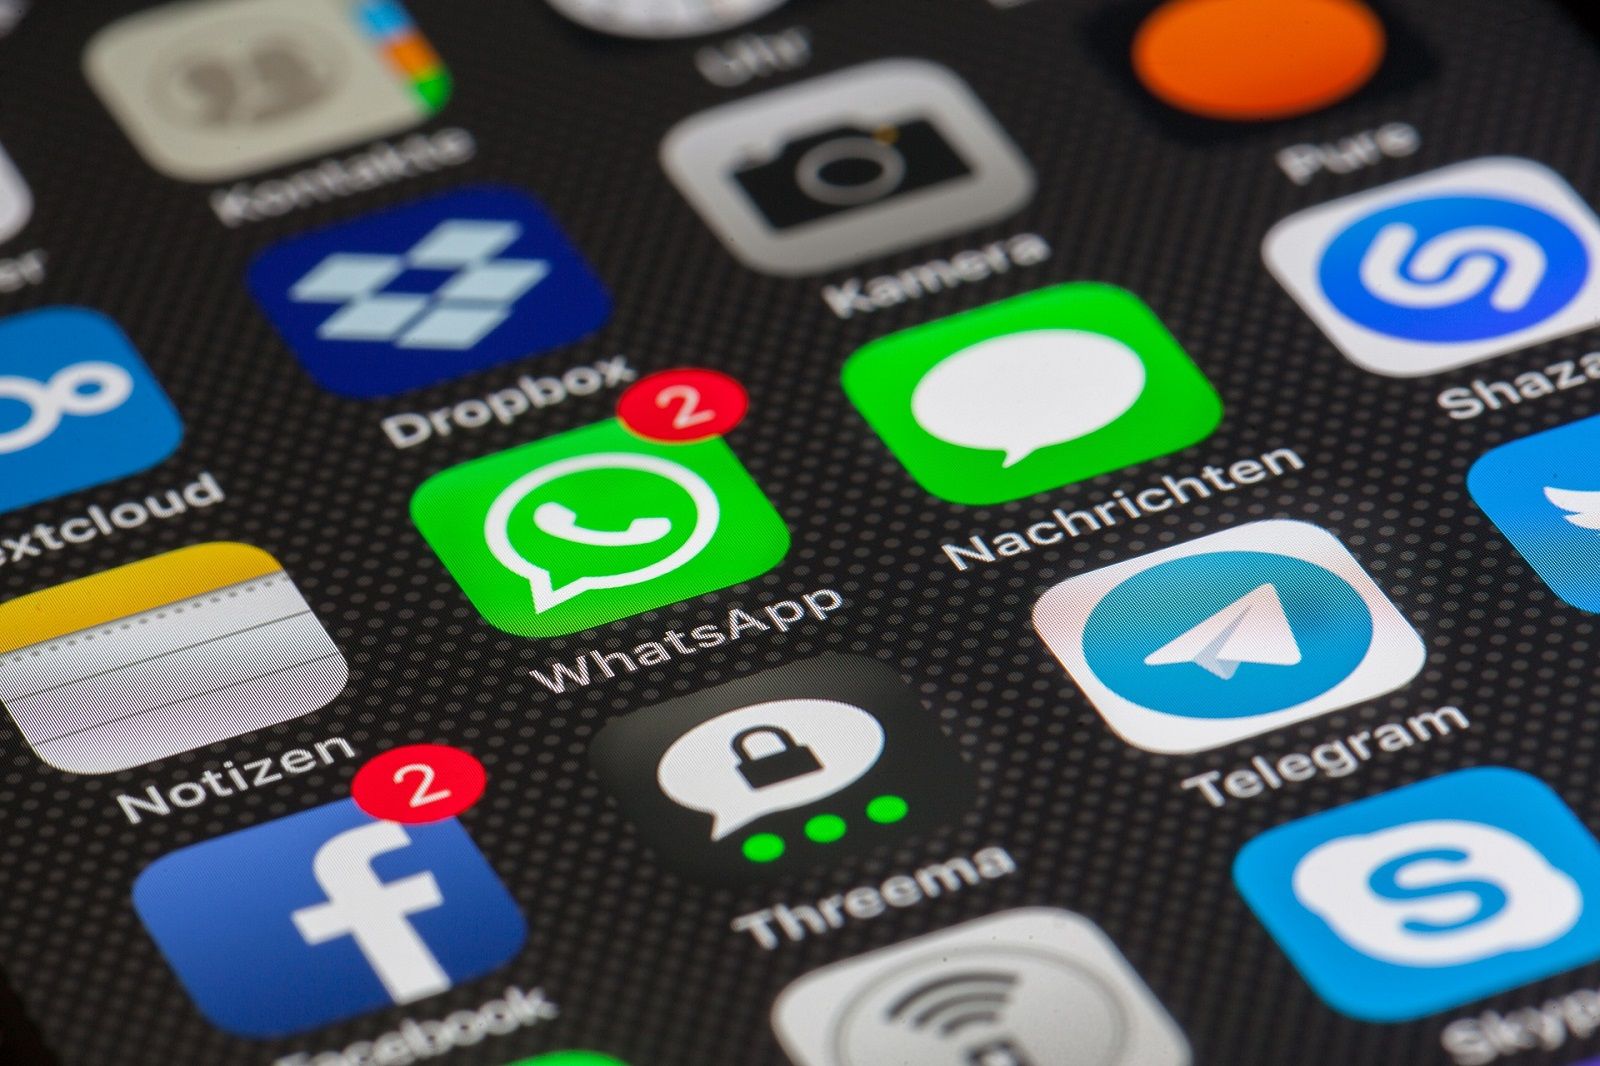 WhatsApp is testing Dark Mode for Apple iPhone users image 1